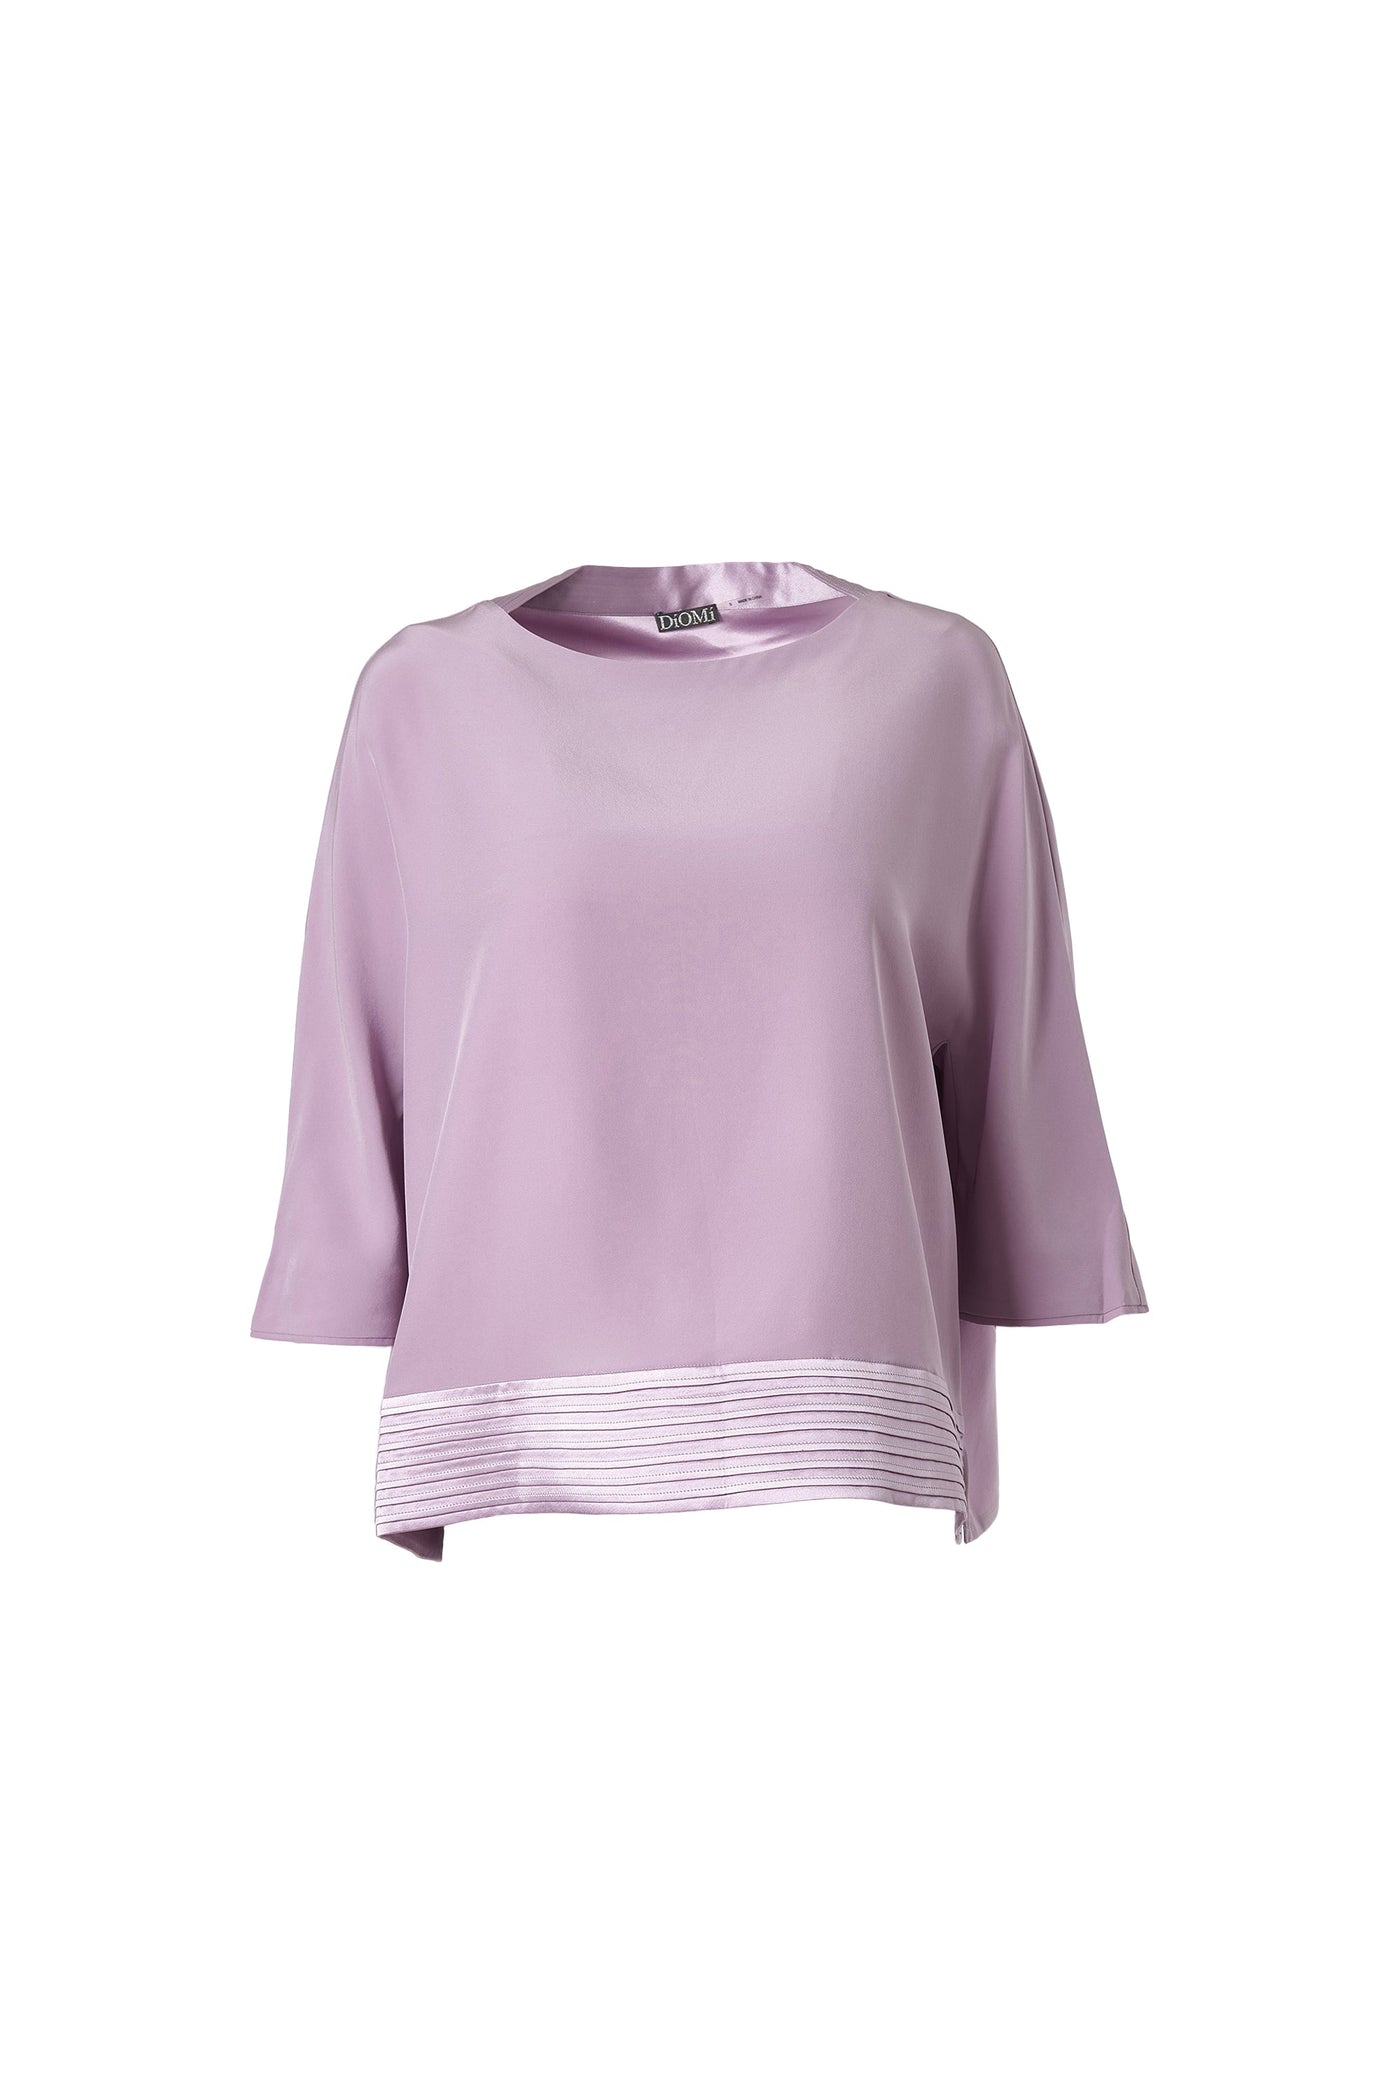 Boat Neck Blouse In Snow Lilac